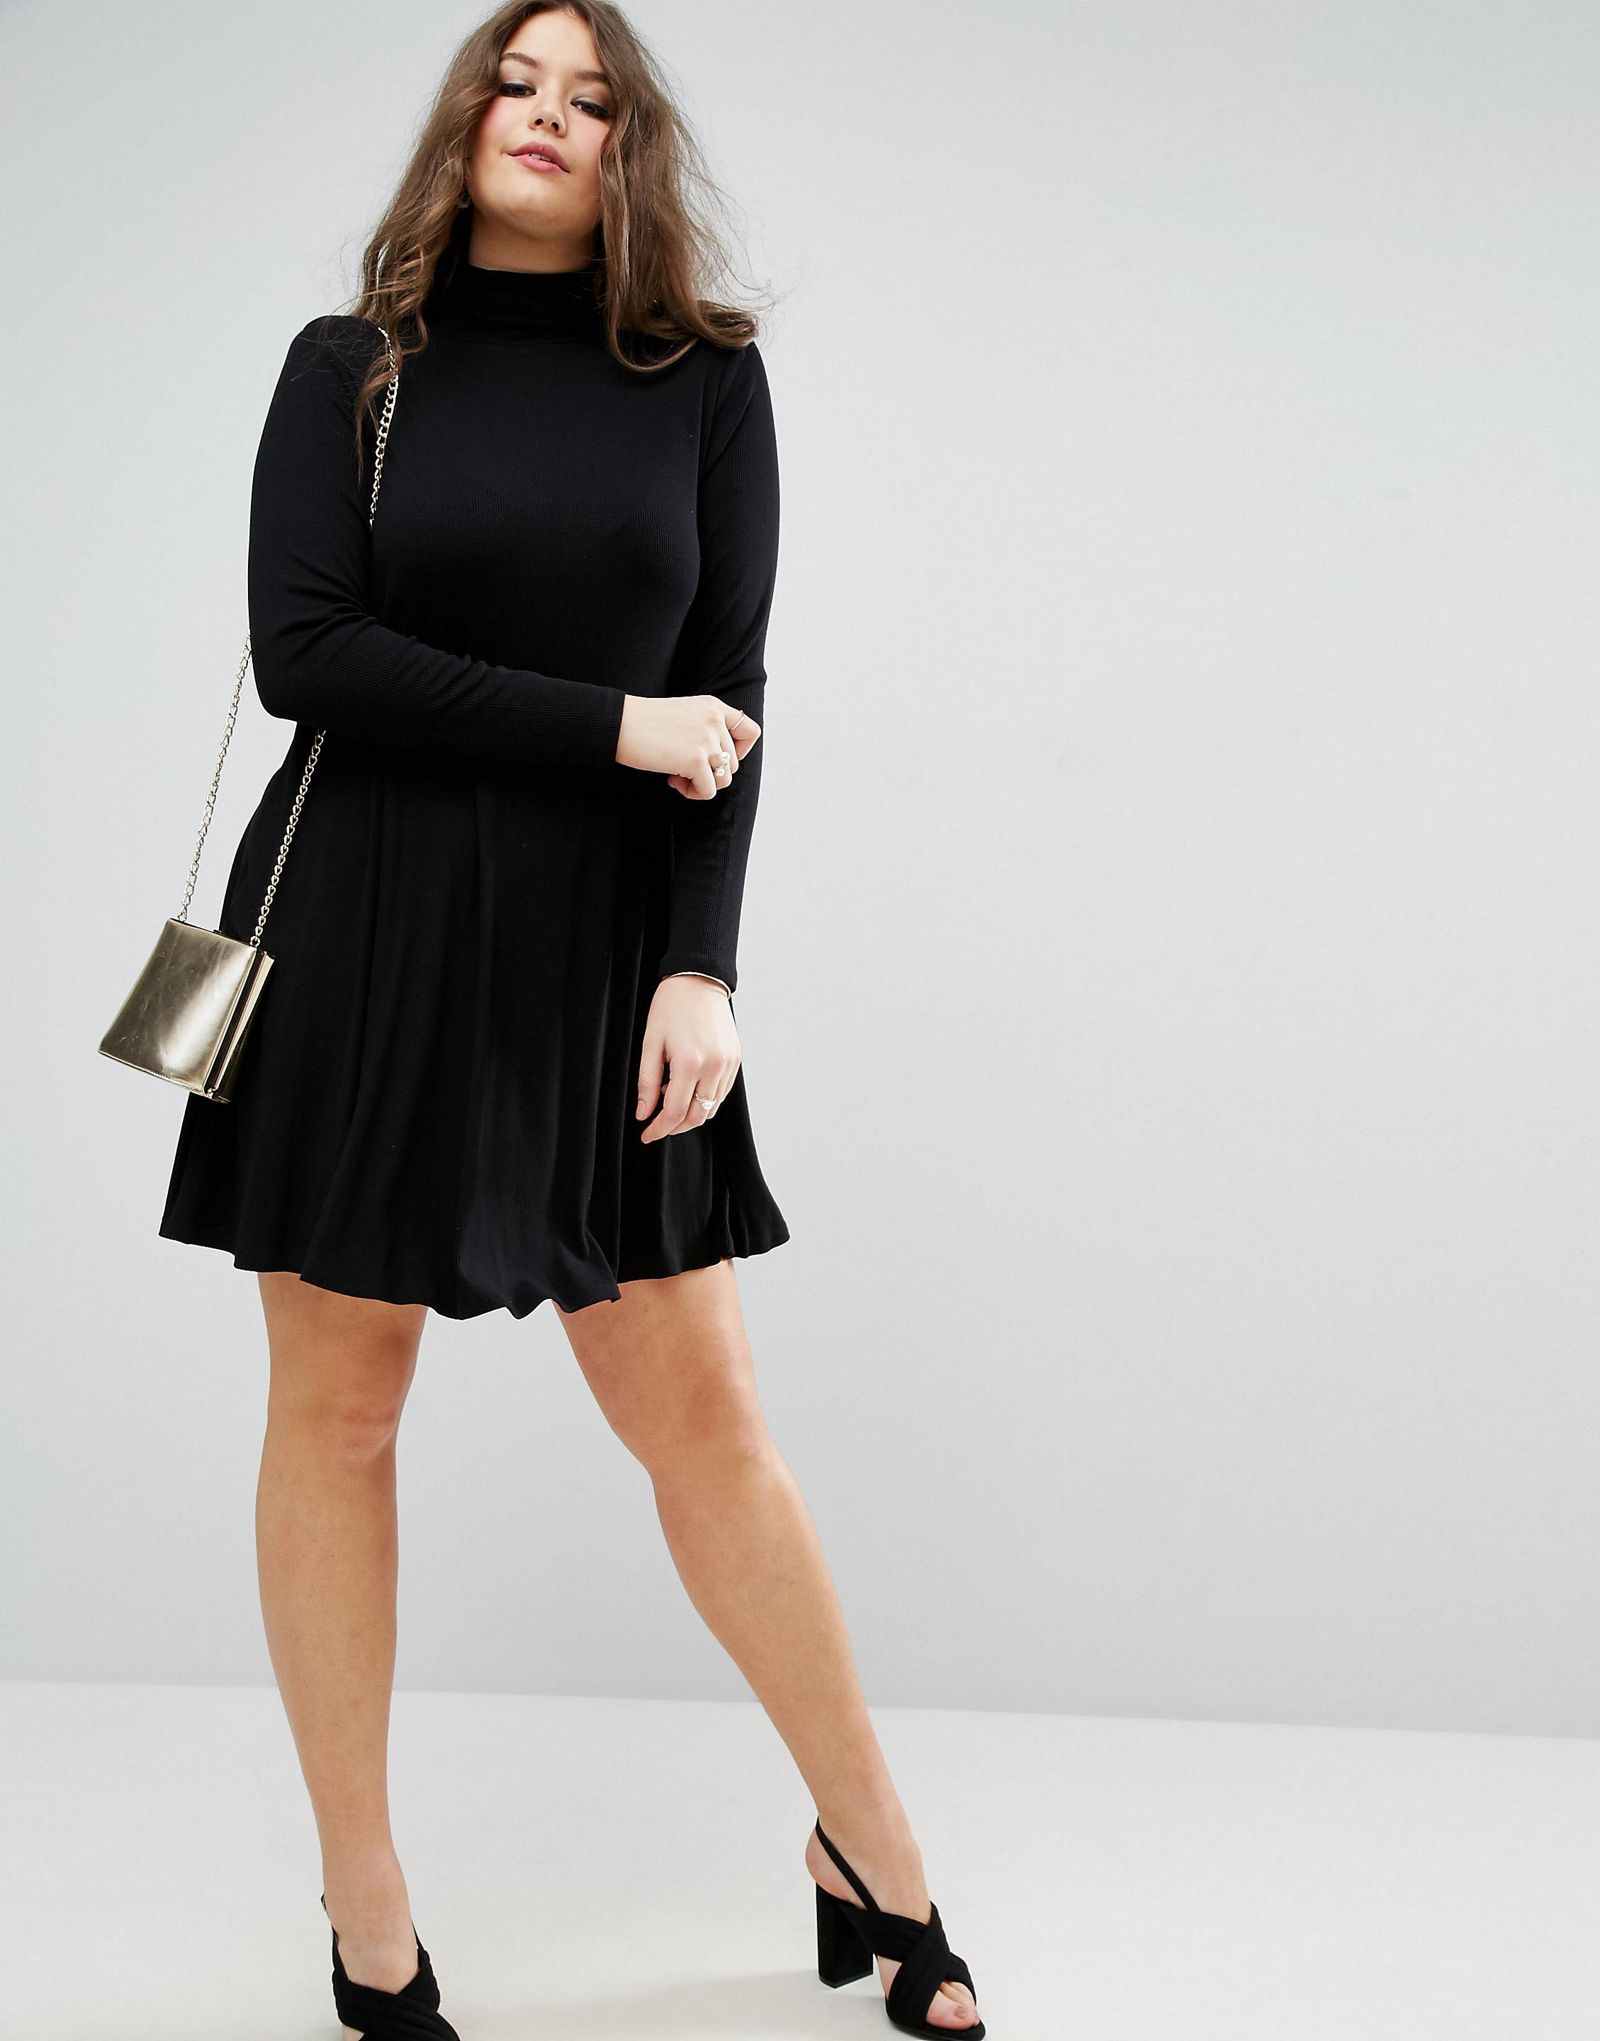 ASOS CURVE Swing Dress in Rib with Long Sleeve